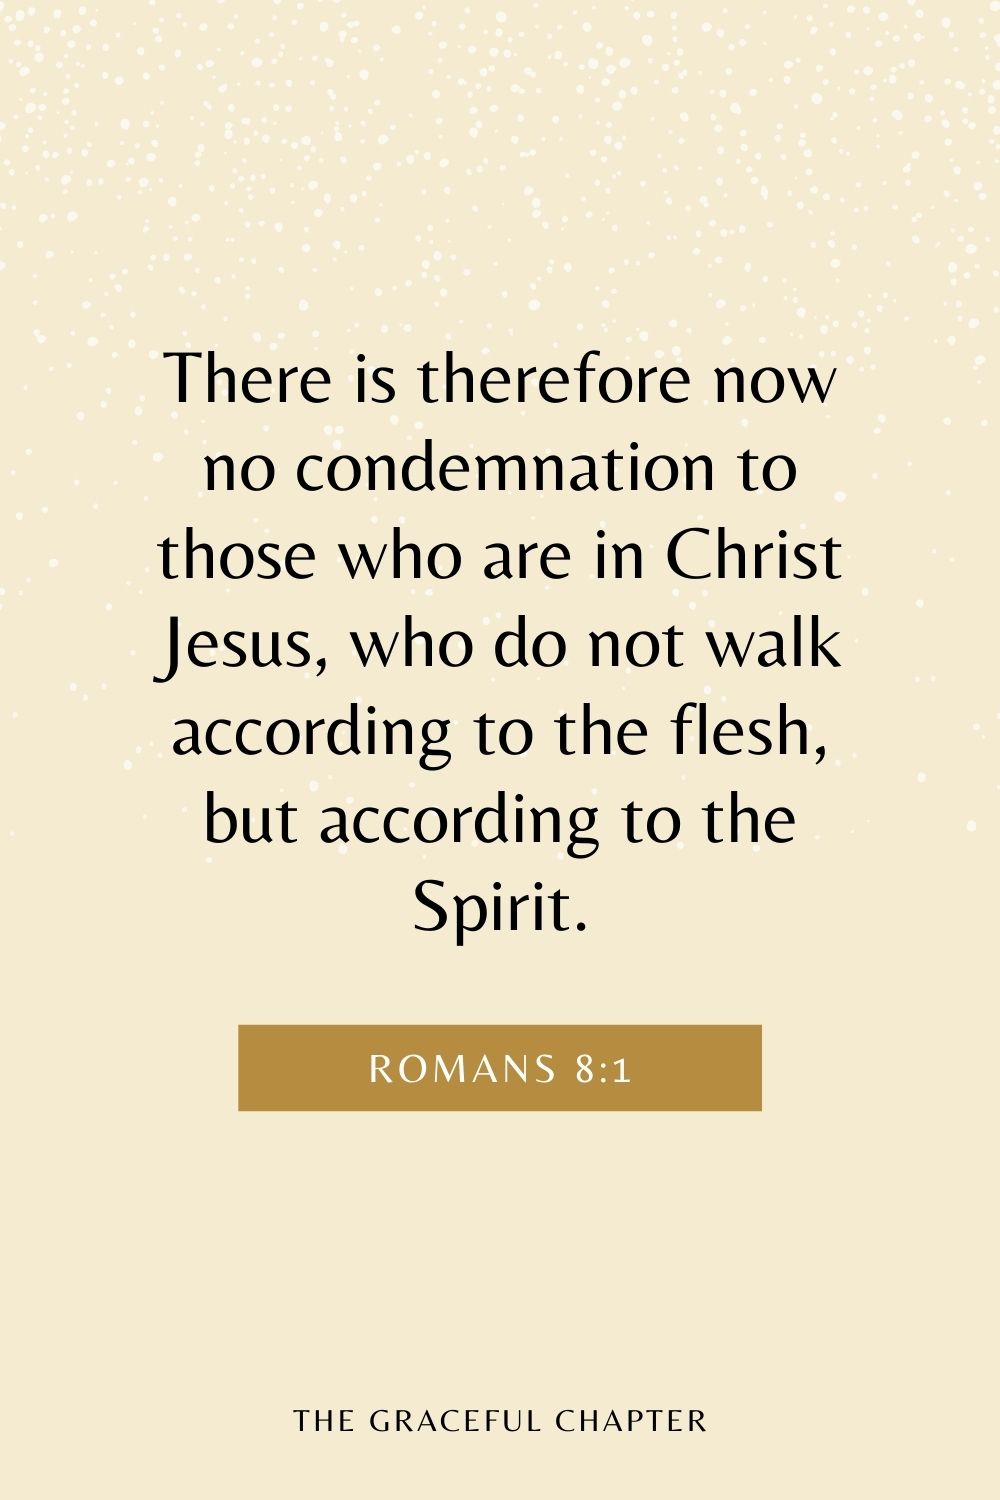 There is therefore now no condemnation to those who are in Christ Jesus, who do not walk according to the flesh, but according to the Spirit. Romans 8:1